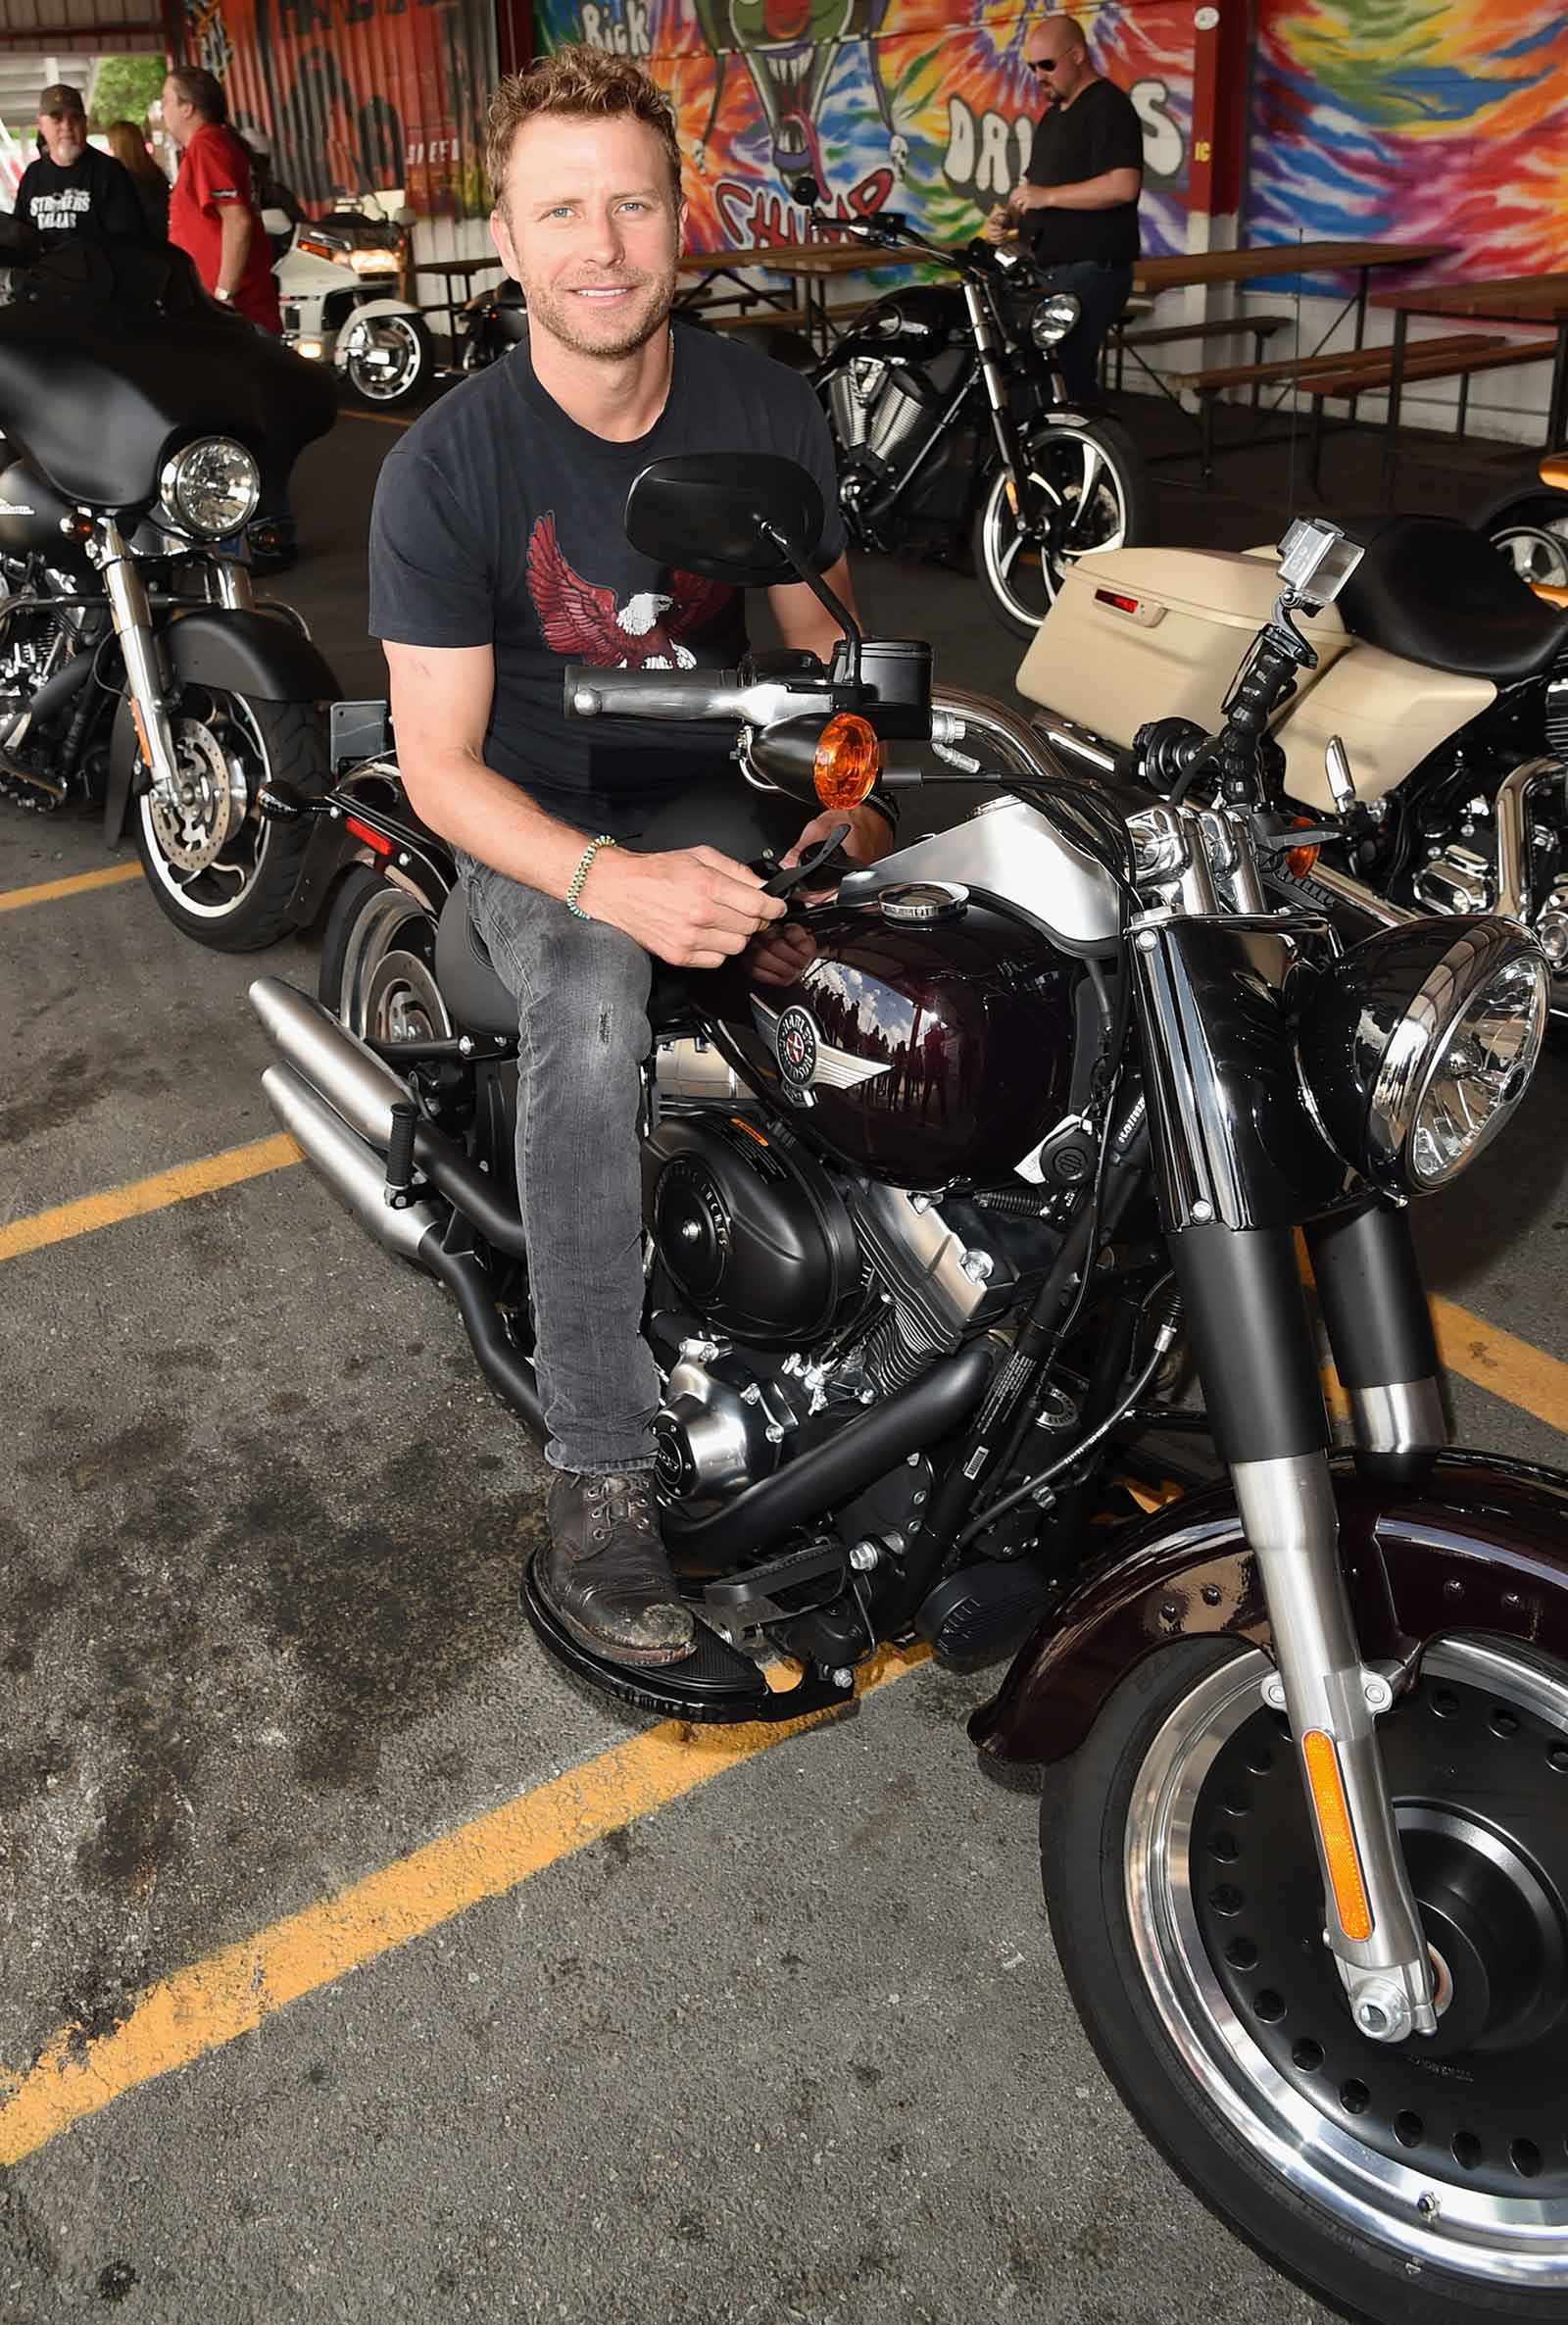 Country star Dierks Bentley poses on a Harley during the ACM Charity Motorcycle Ride & Concert.